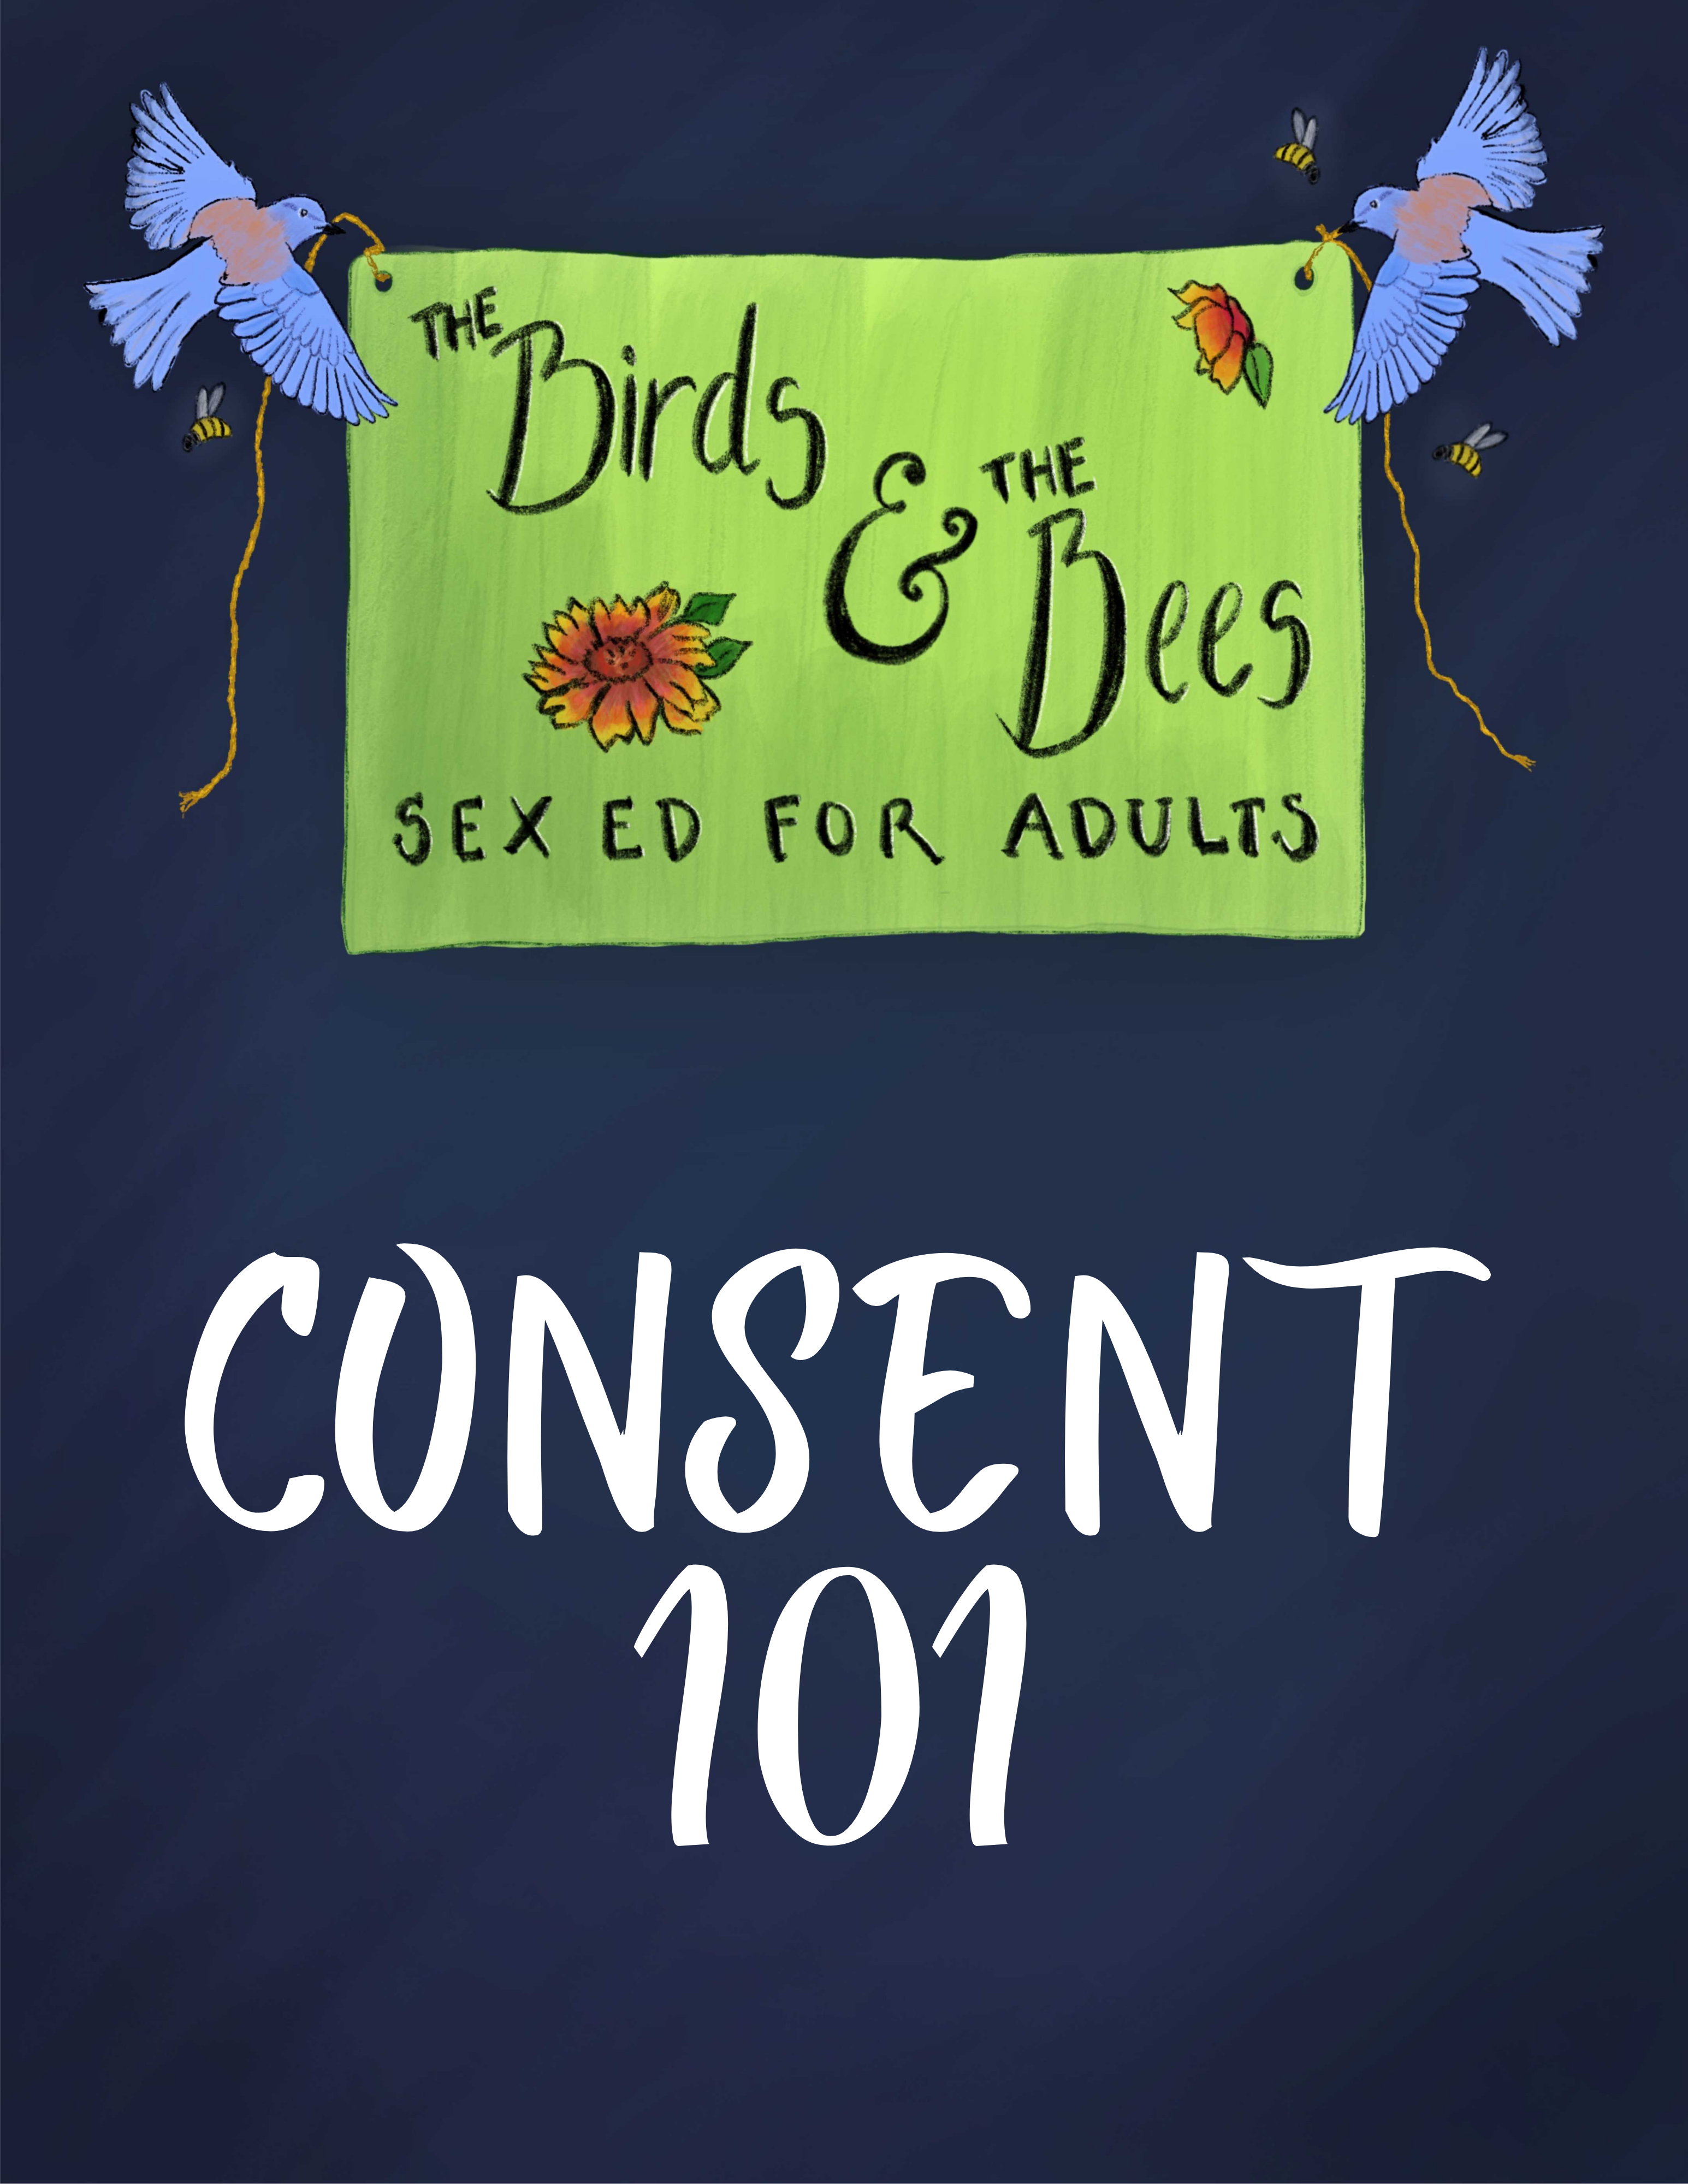 Two bluebirds are holding a banner surrounded by bees. The banner has two red sunflowers on it, and reads "The Birds and the Bees: Sex Ed for Adults." Below the banner are the words, Consent 101.